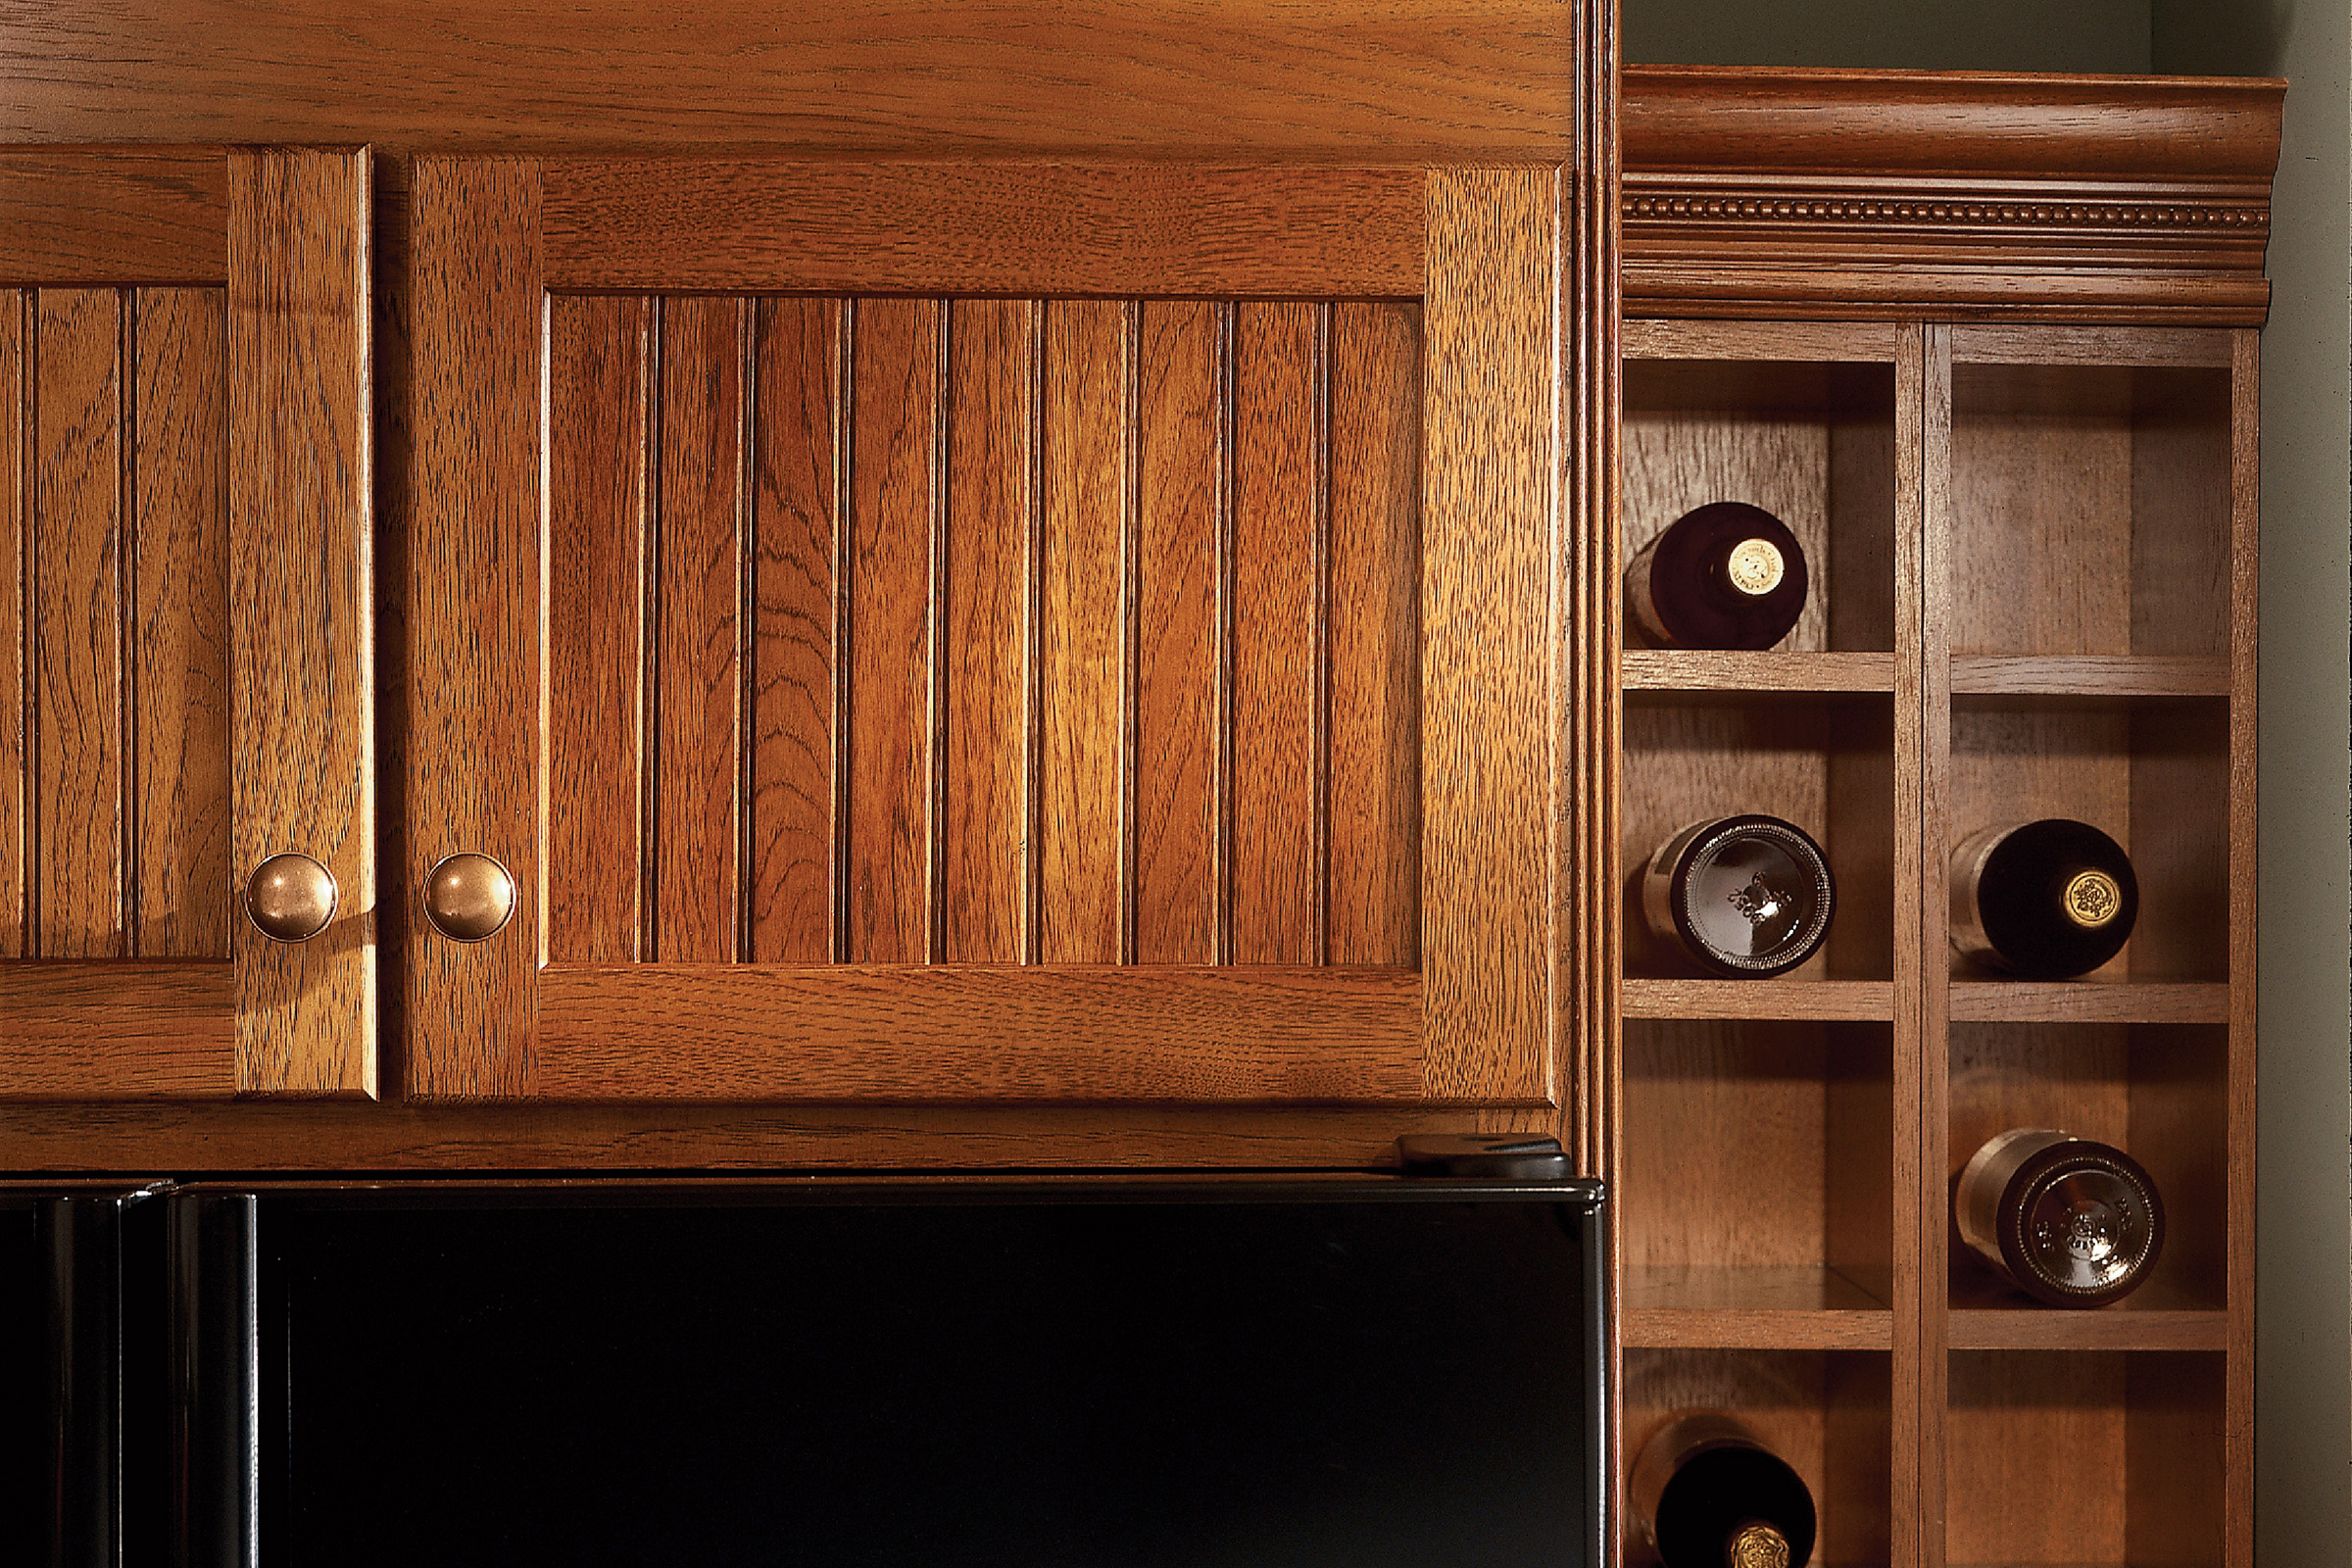 Space-Saving Kitchen Cabinet Wine Rack Project (DIY)